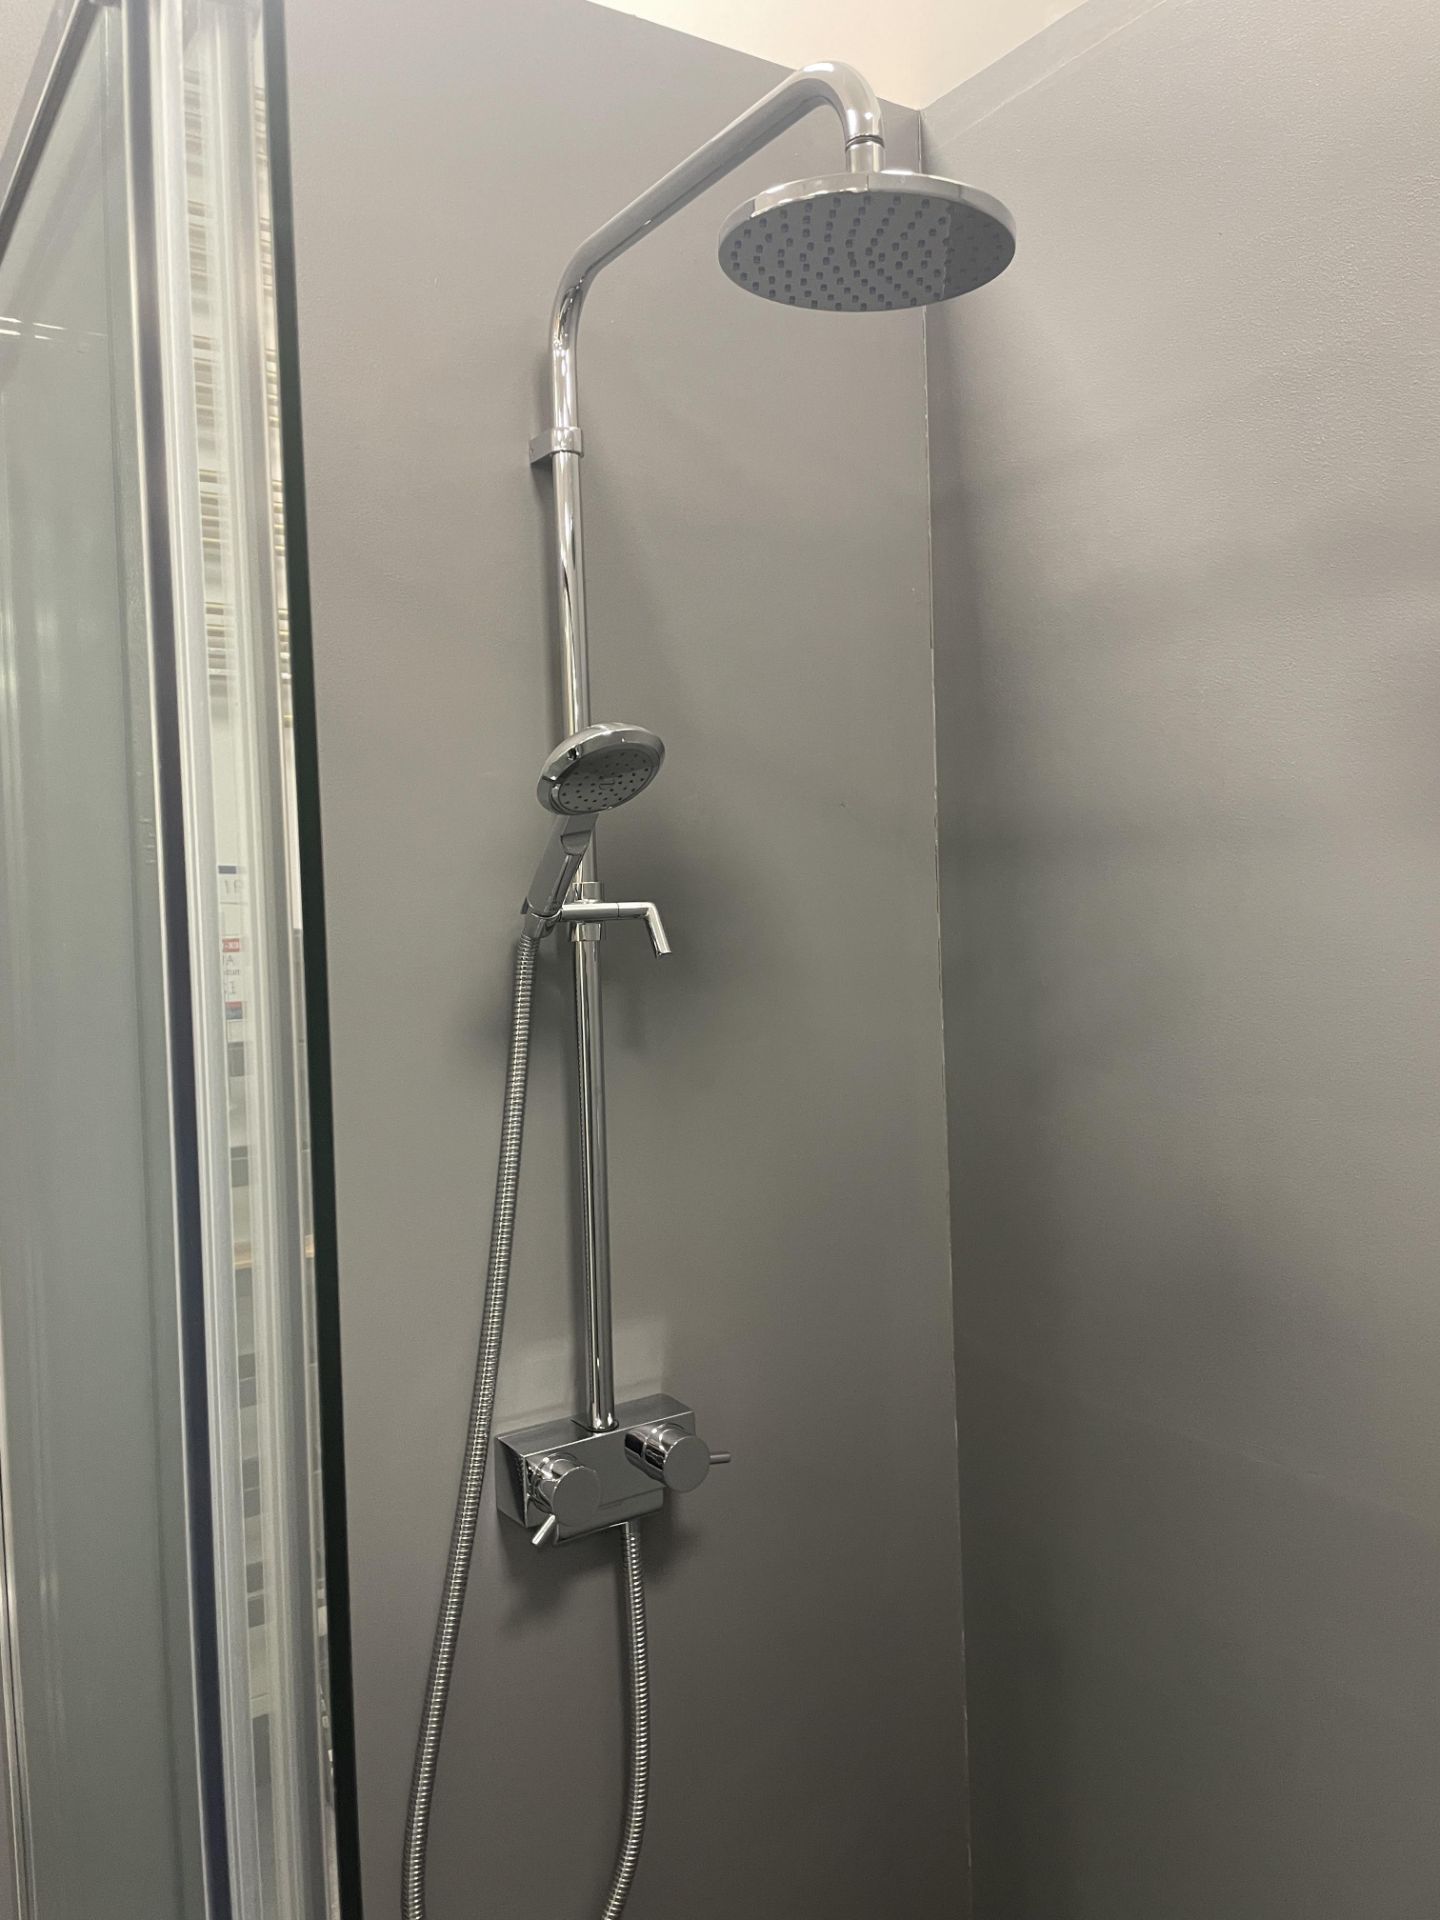 Matki Single Sliding Door Shower Enclosure, with showerhead, flexible shower head and mixers, - Image 3 of 3